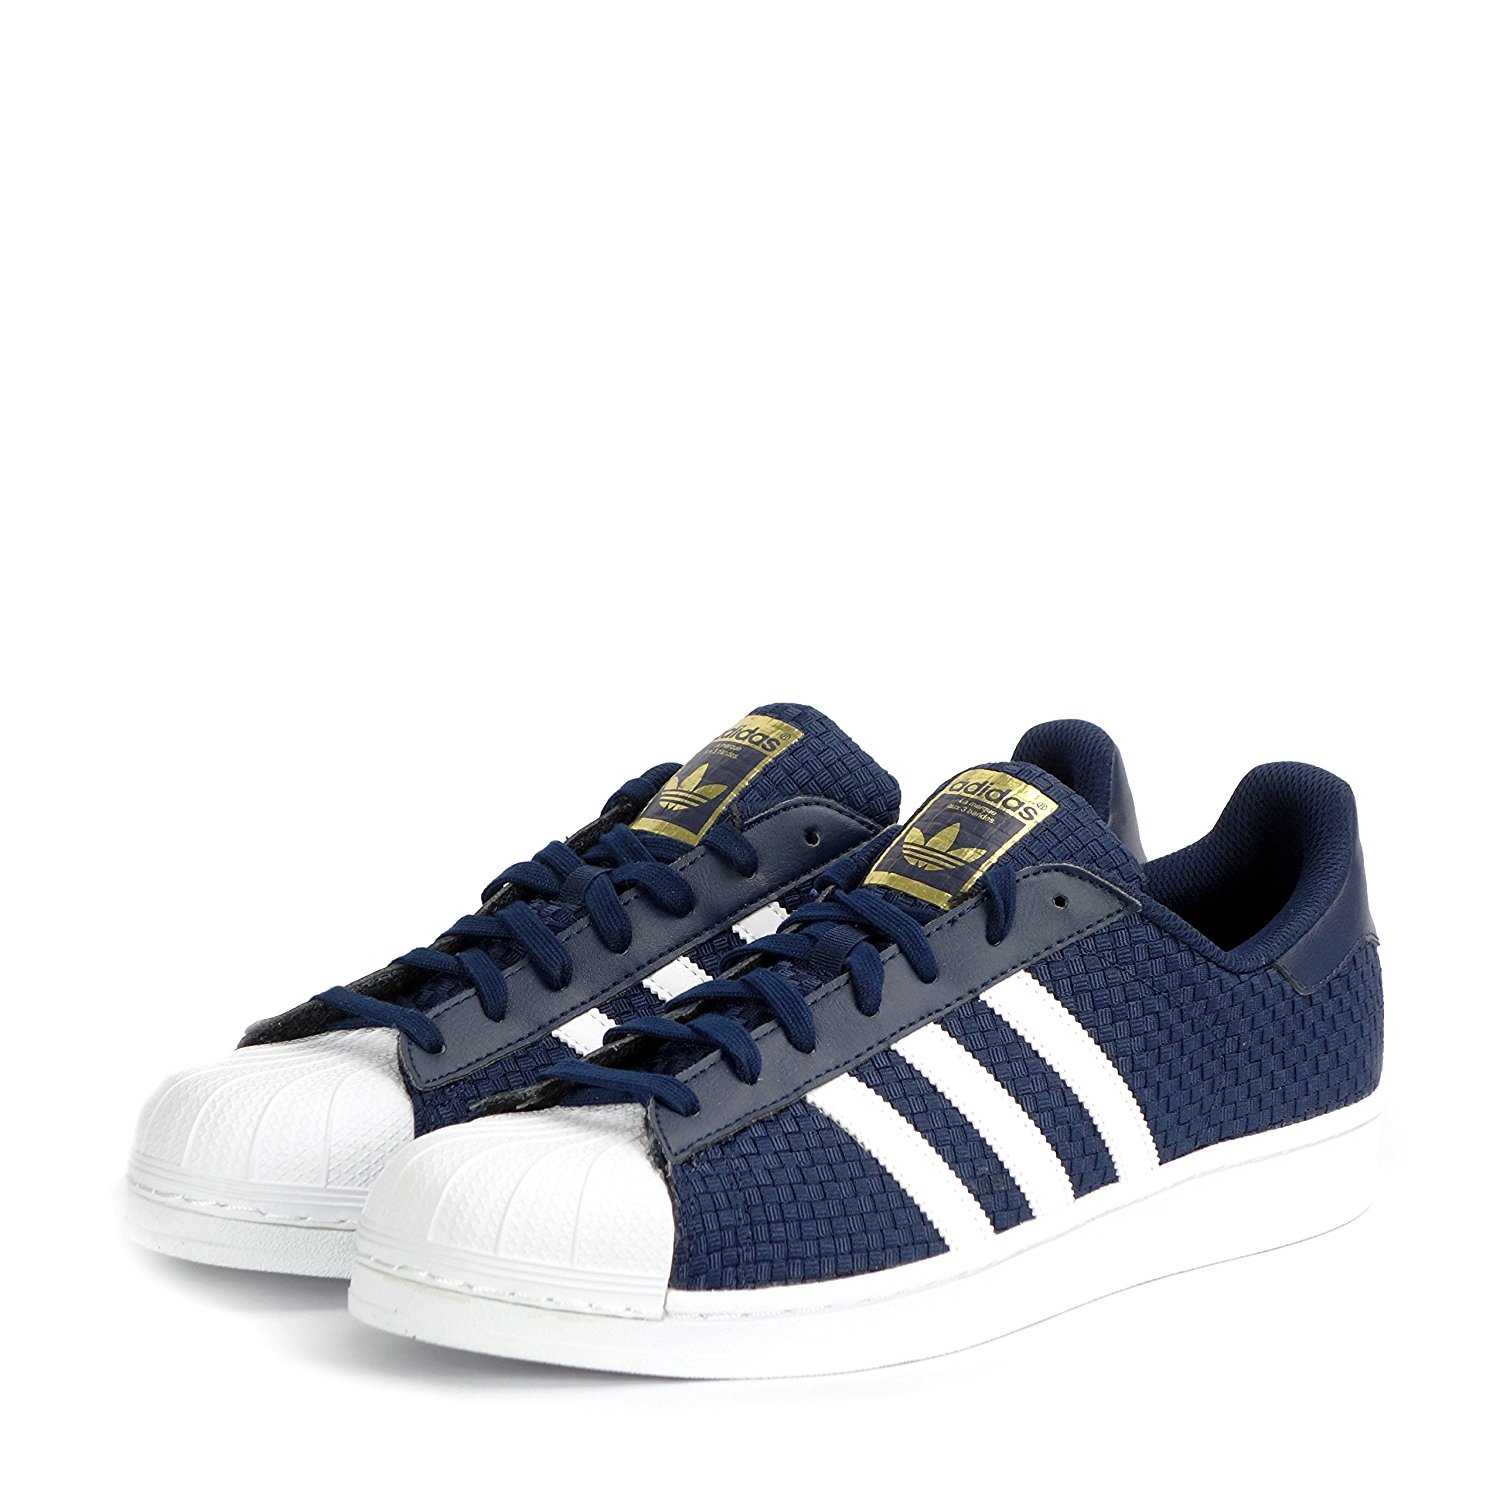 Adidas Superstar Textile Leather Trainers r 39 1/3 - 7029692647 ...